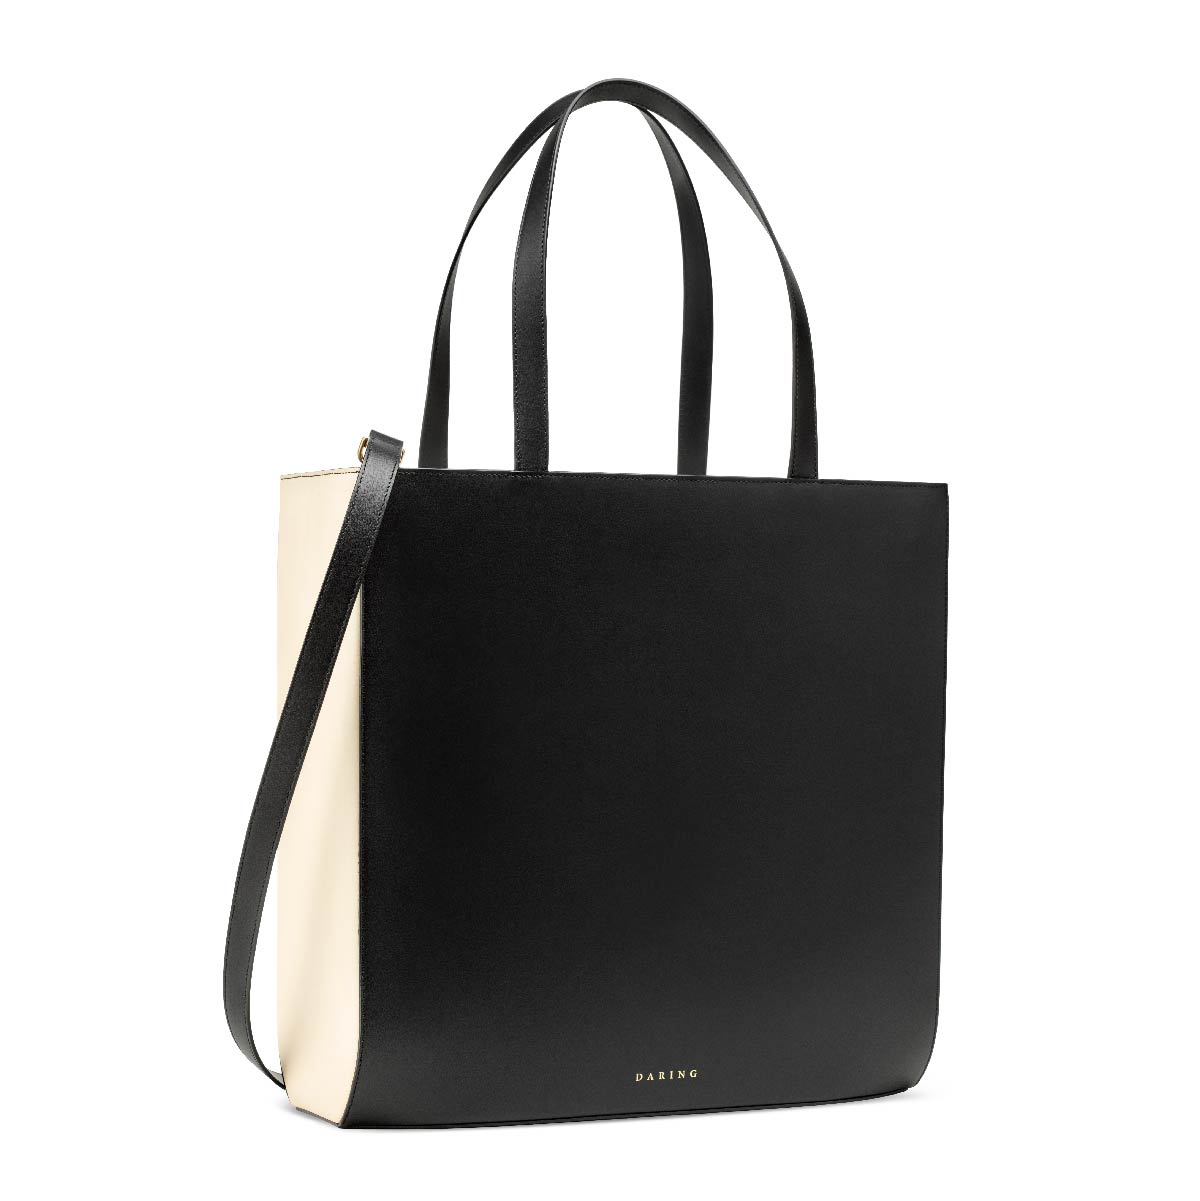 The Tote in Black + Cream, with removable strap and top handles, three quarter view.